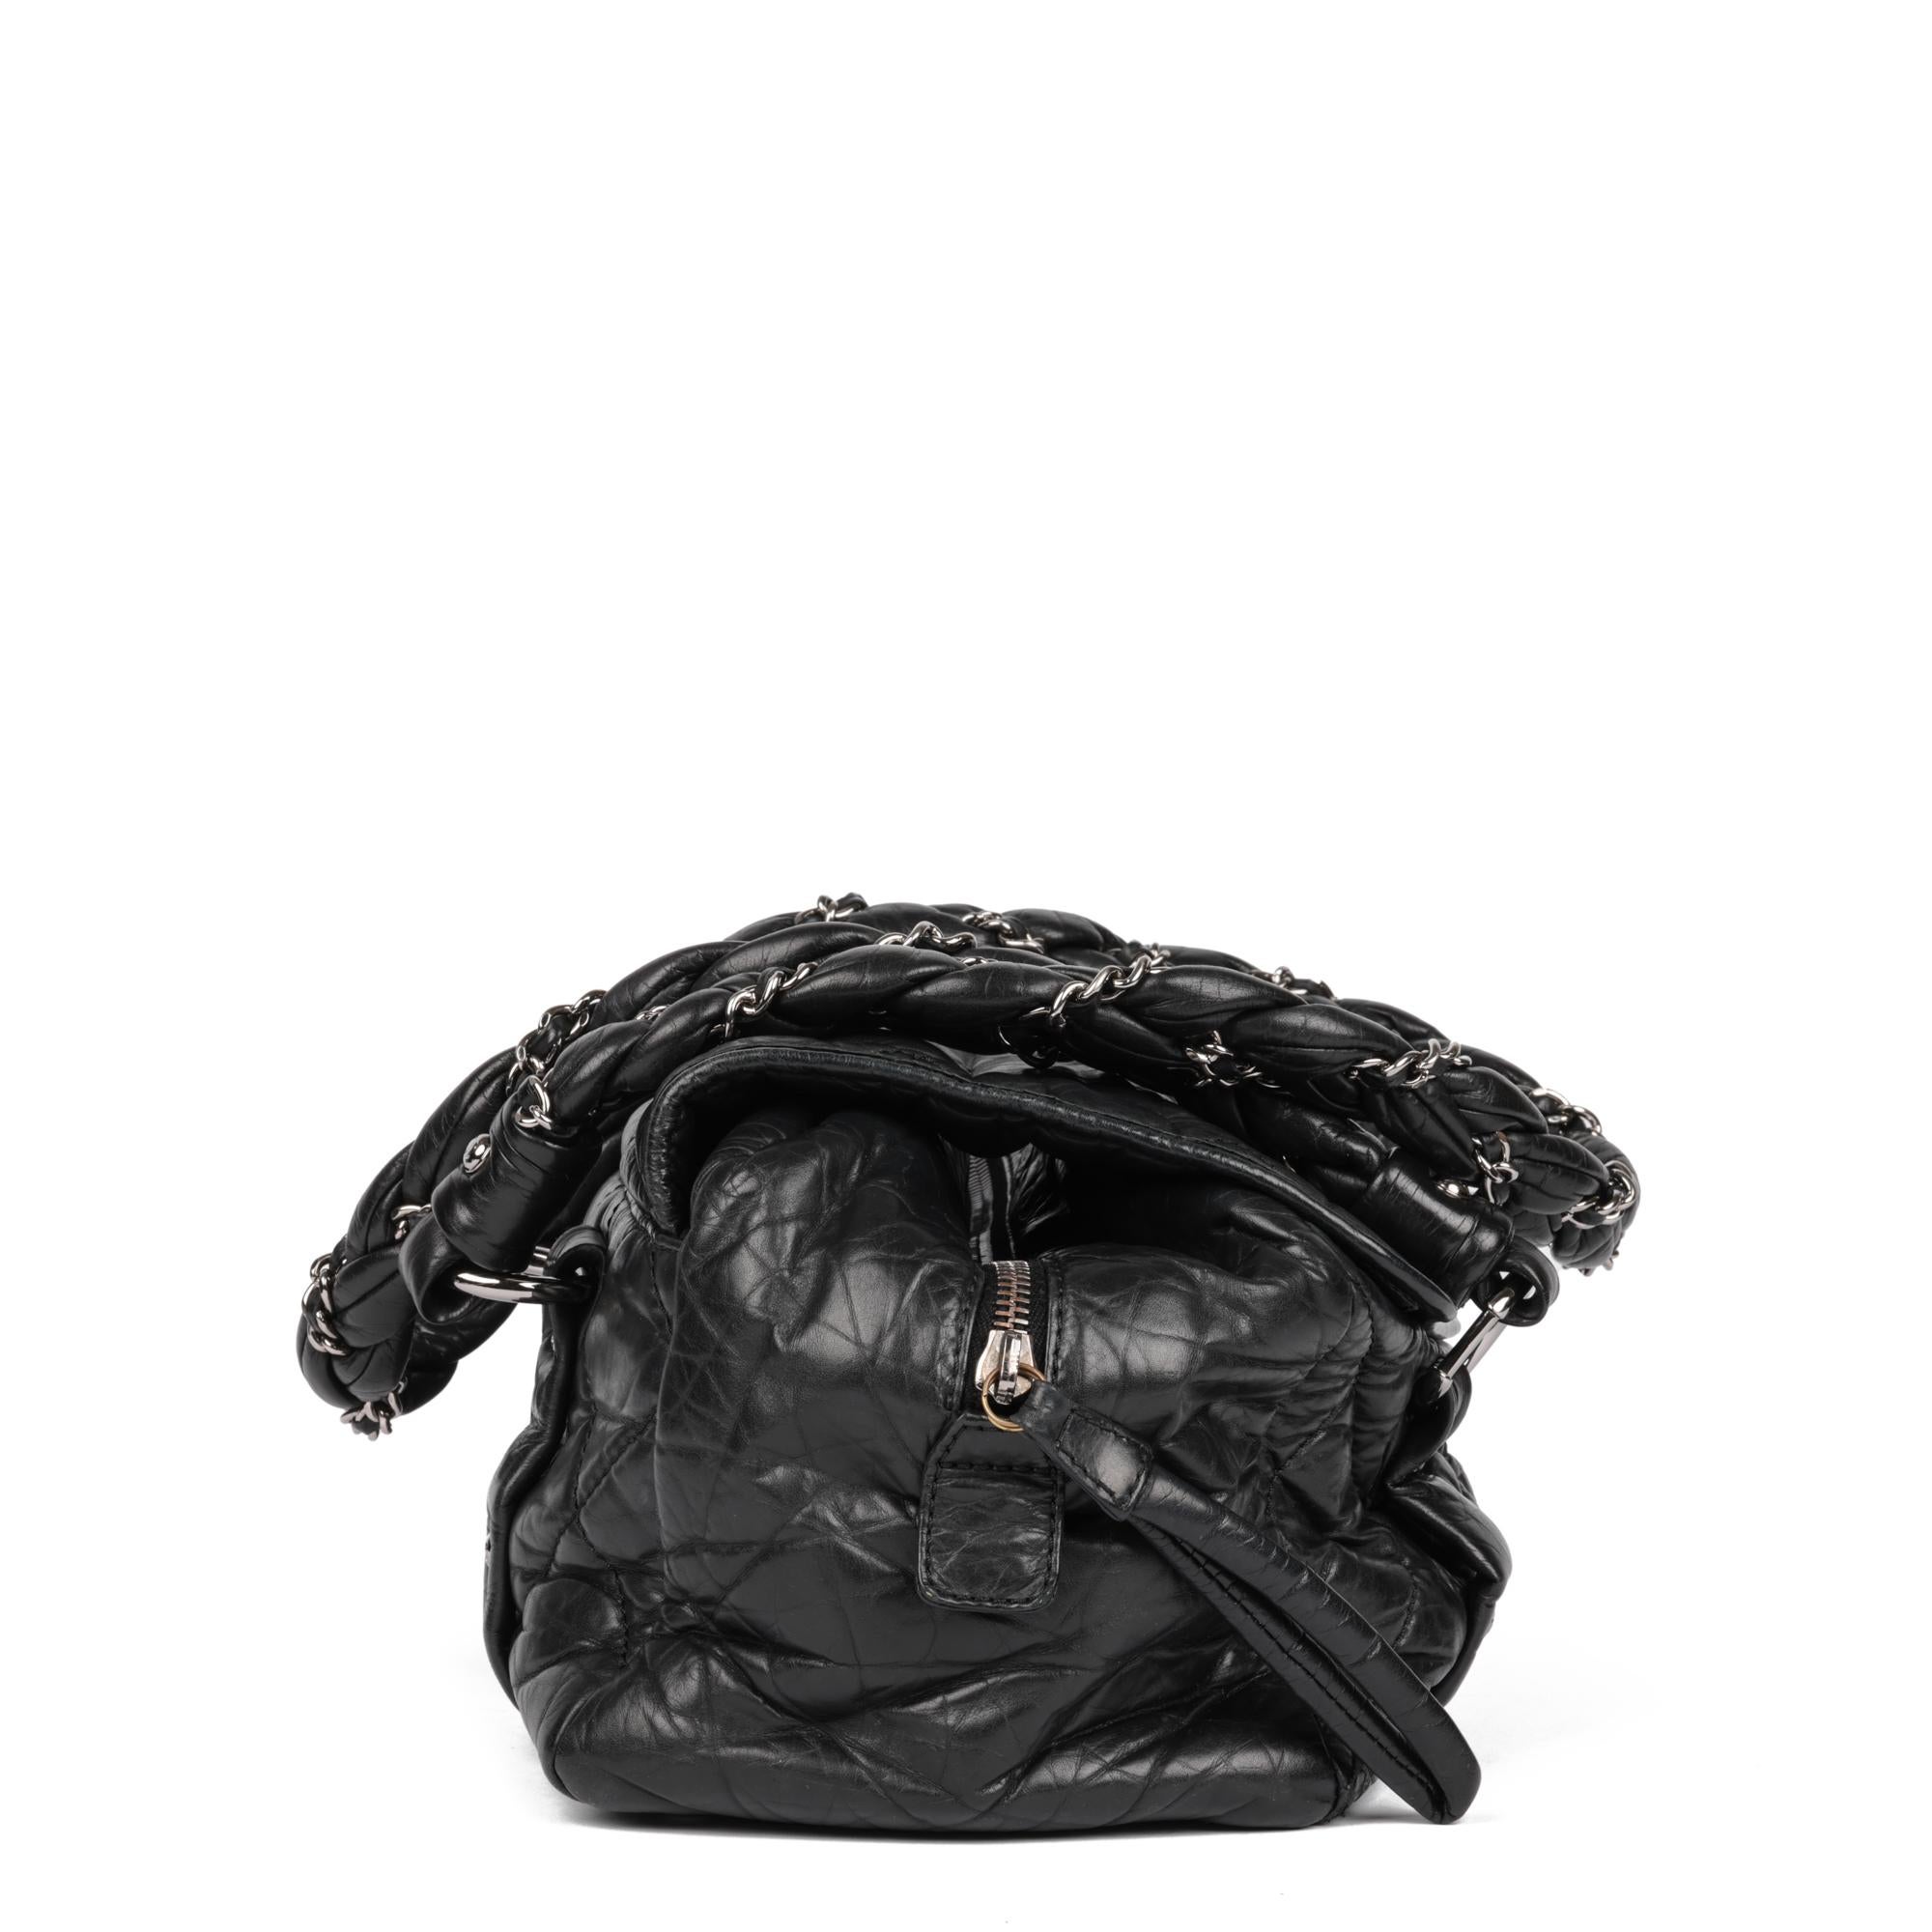 CHANEL Black Lambskin Lady Braid Flap Tote  In Excellent Condition For Sale In Bishop's Stortford, Hertfordshire